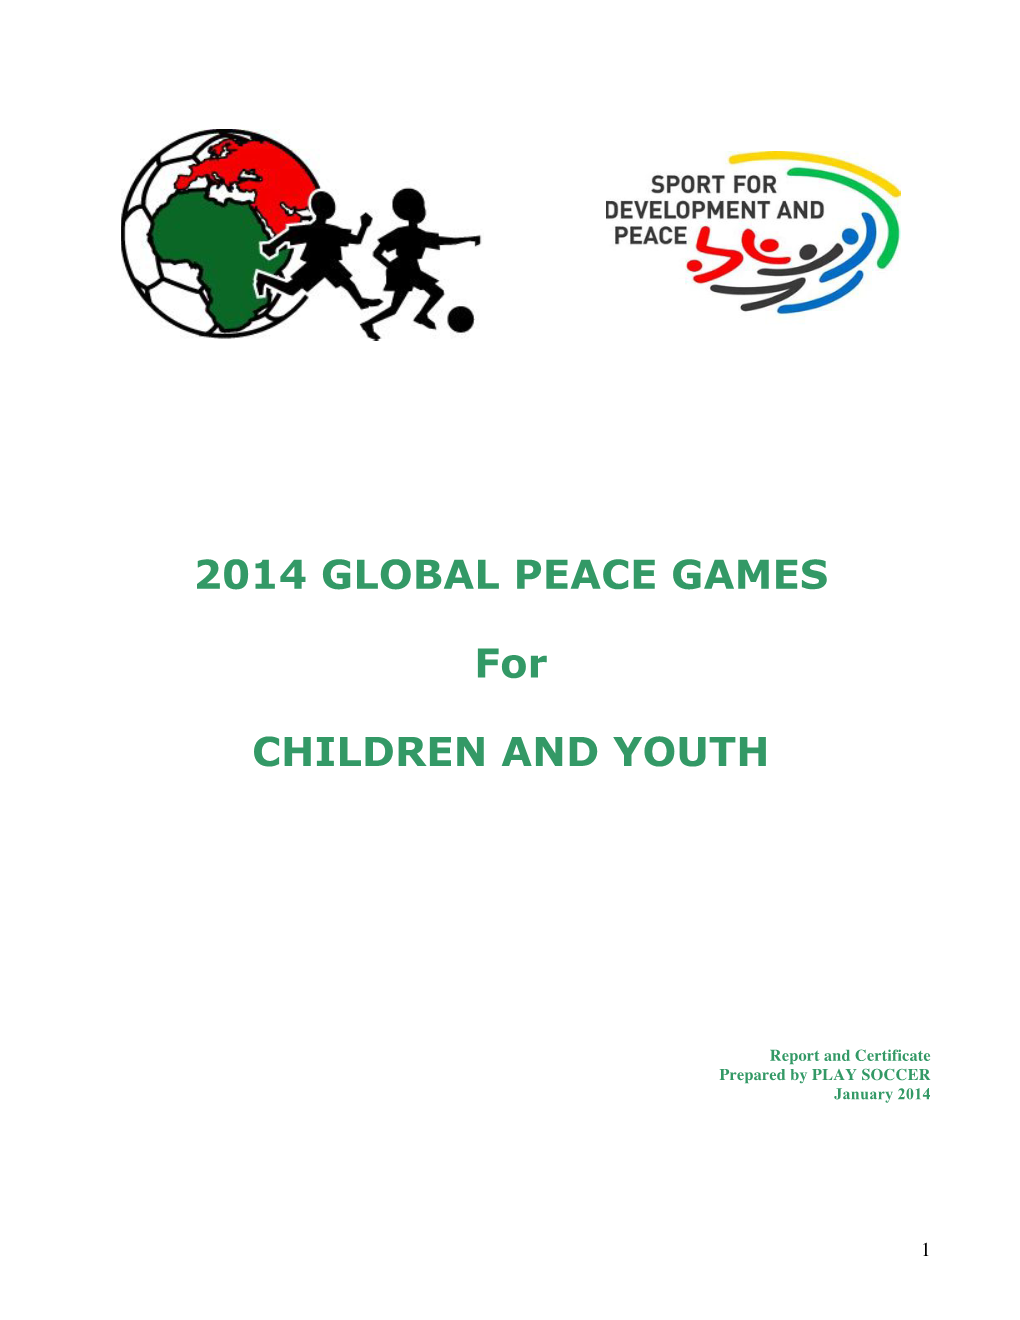 2014 GLOBAL PEACE GAMES for CHILDREN and YOUTH